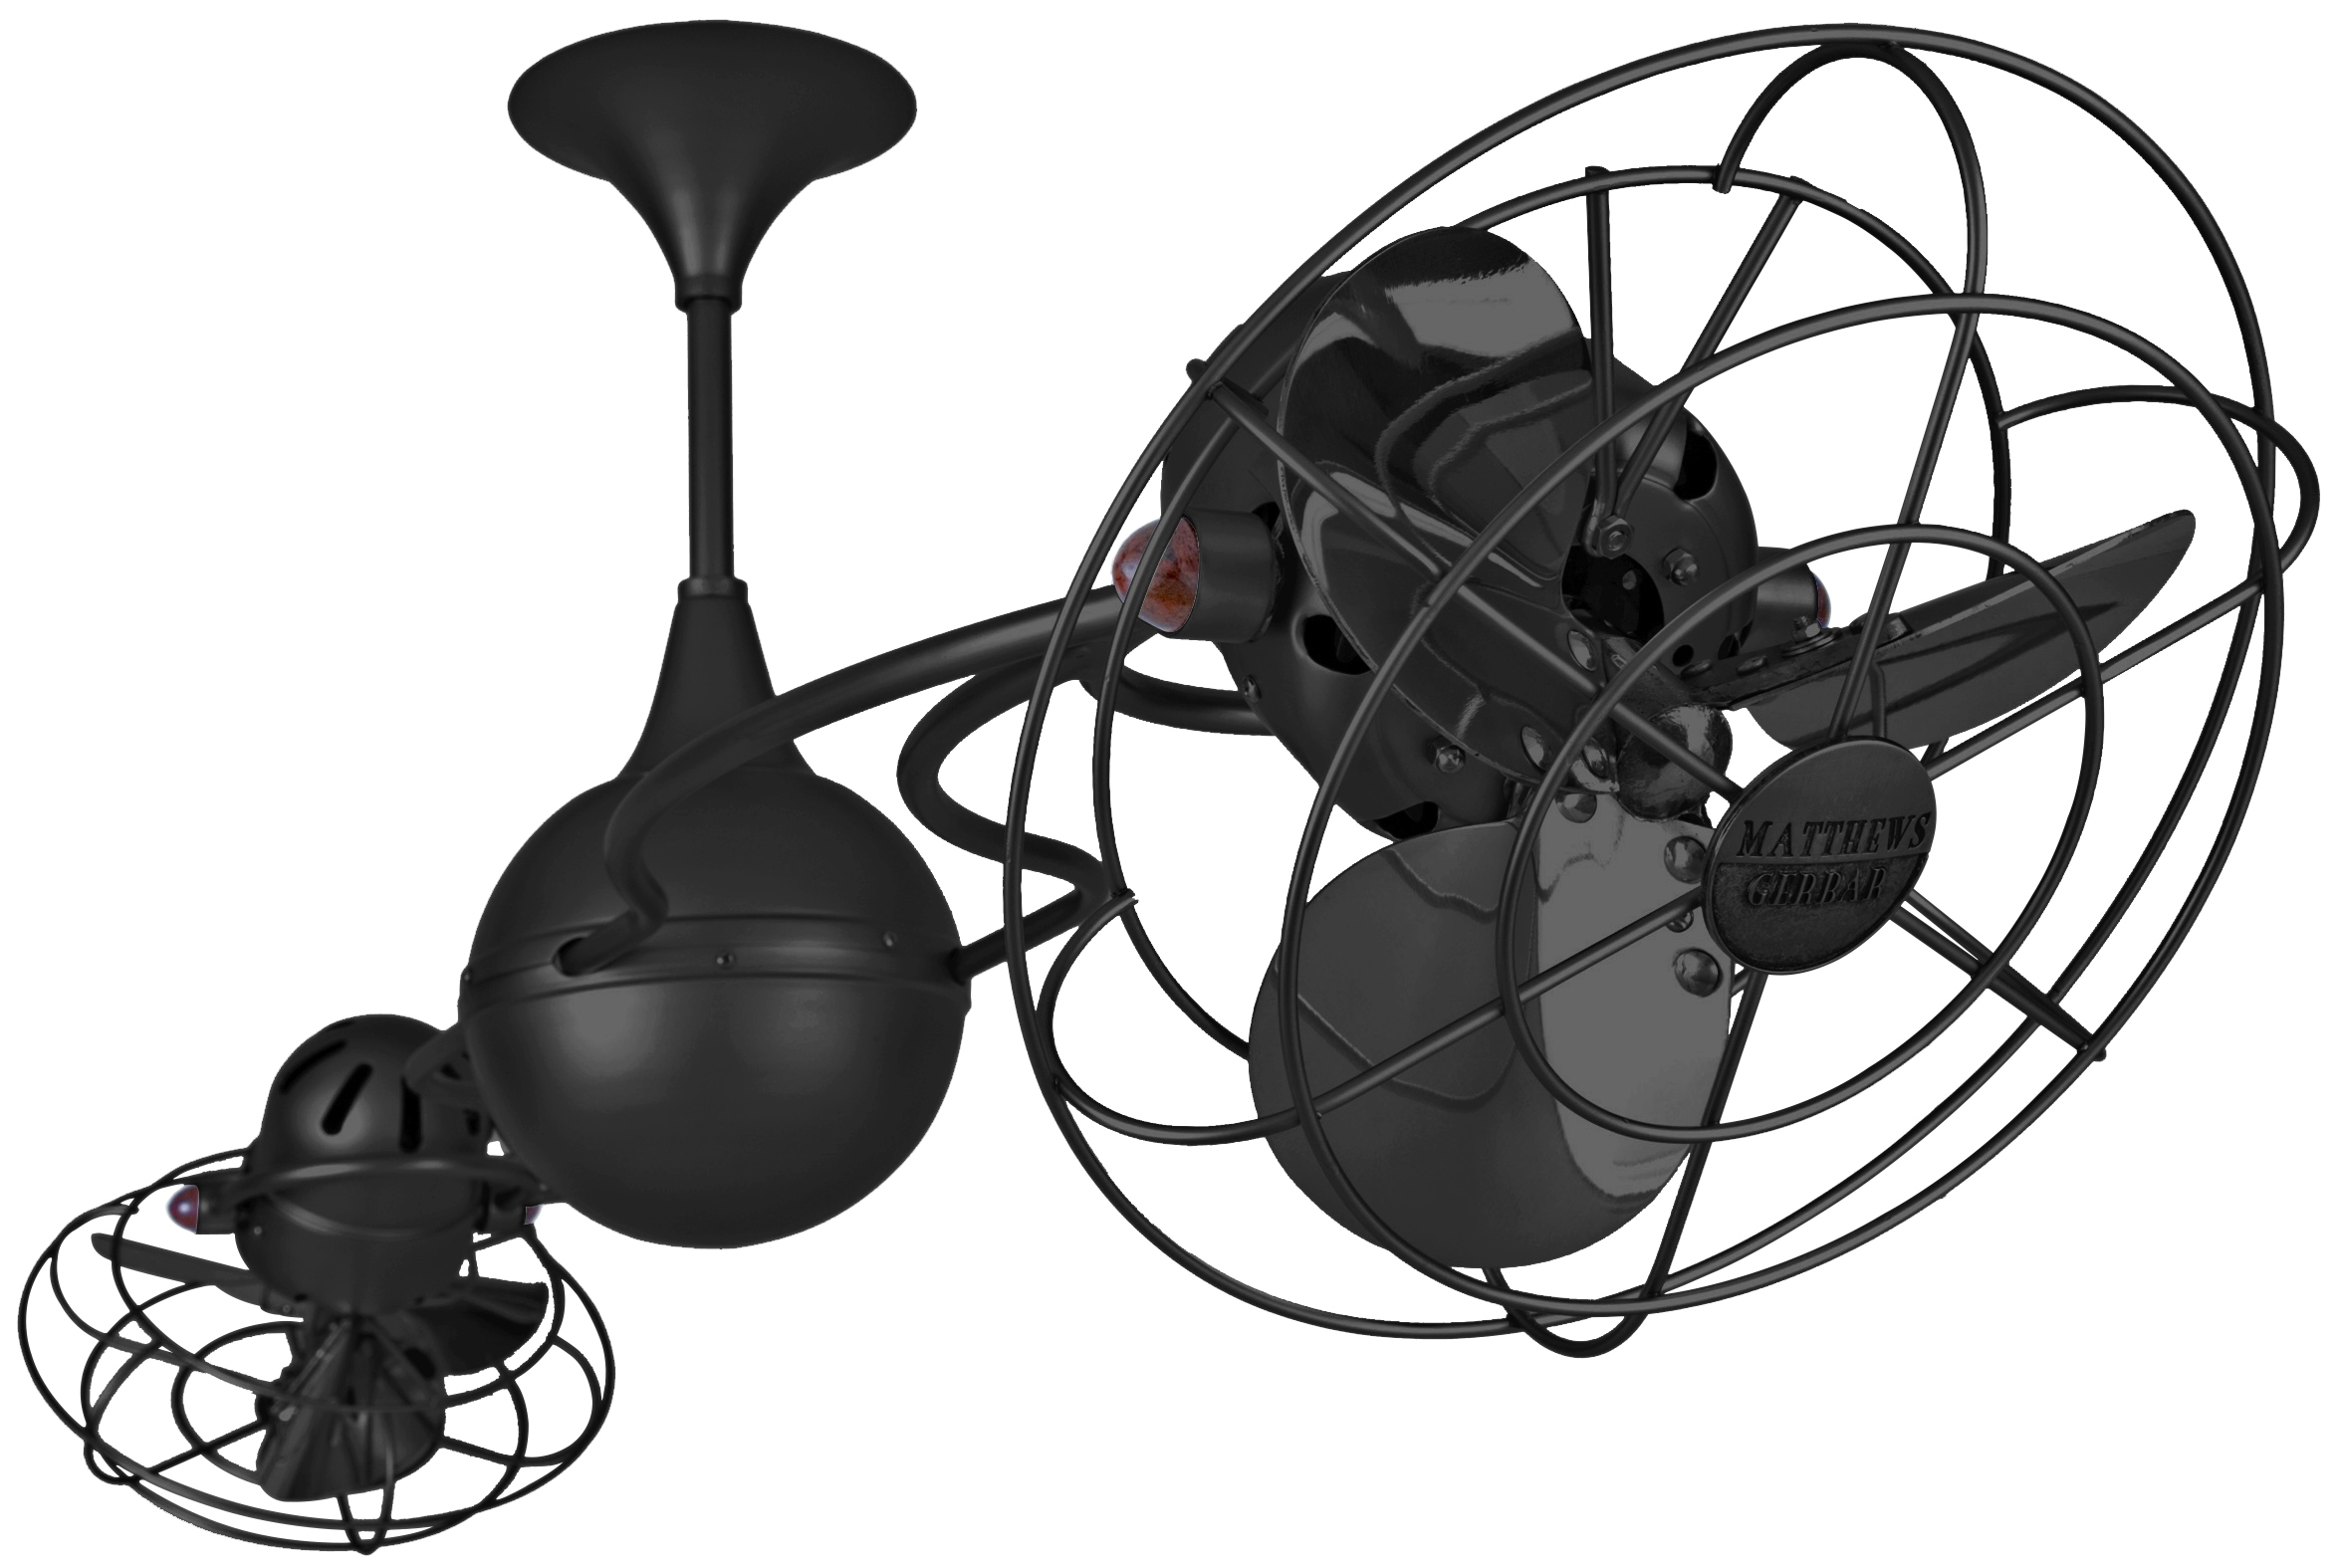 Italo Ventania Rotational Dual Head Ceiling Fan in Black finish with Metal Blades and Decorative Cage